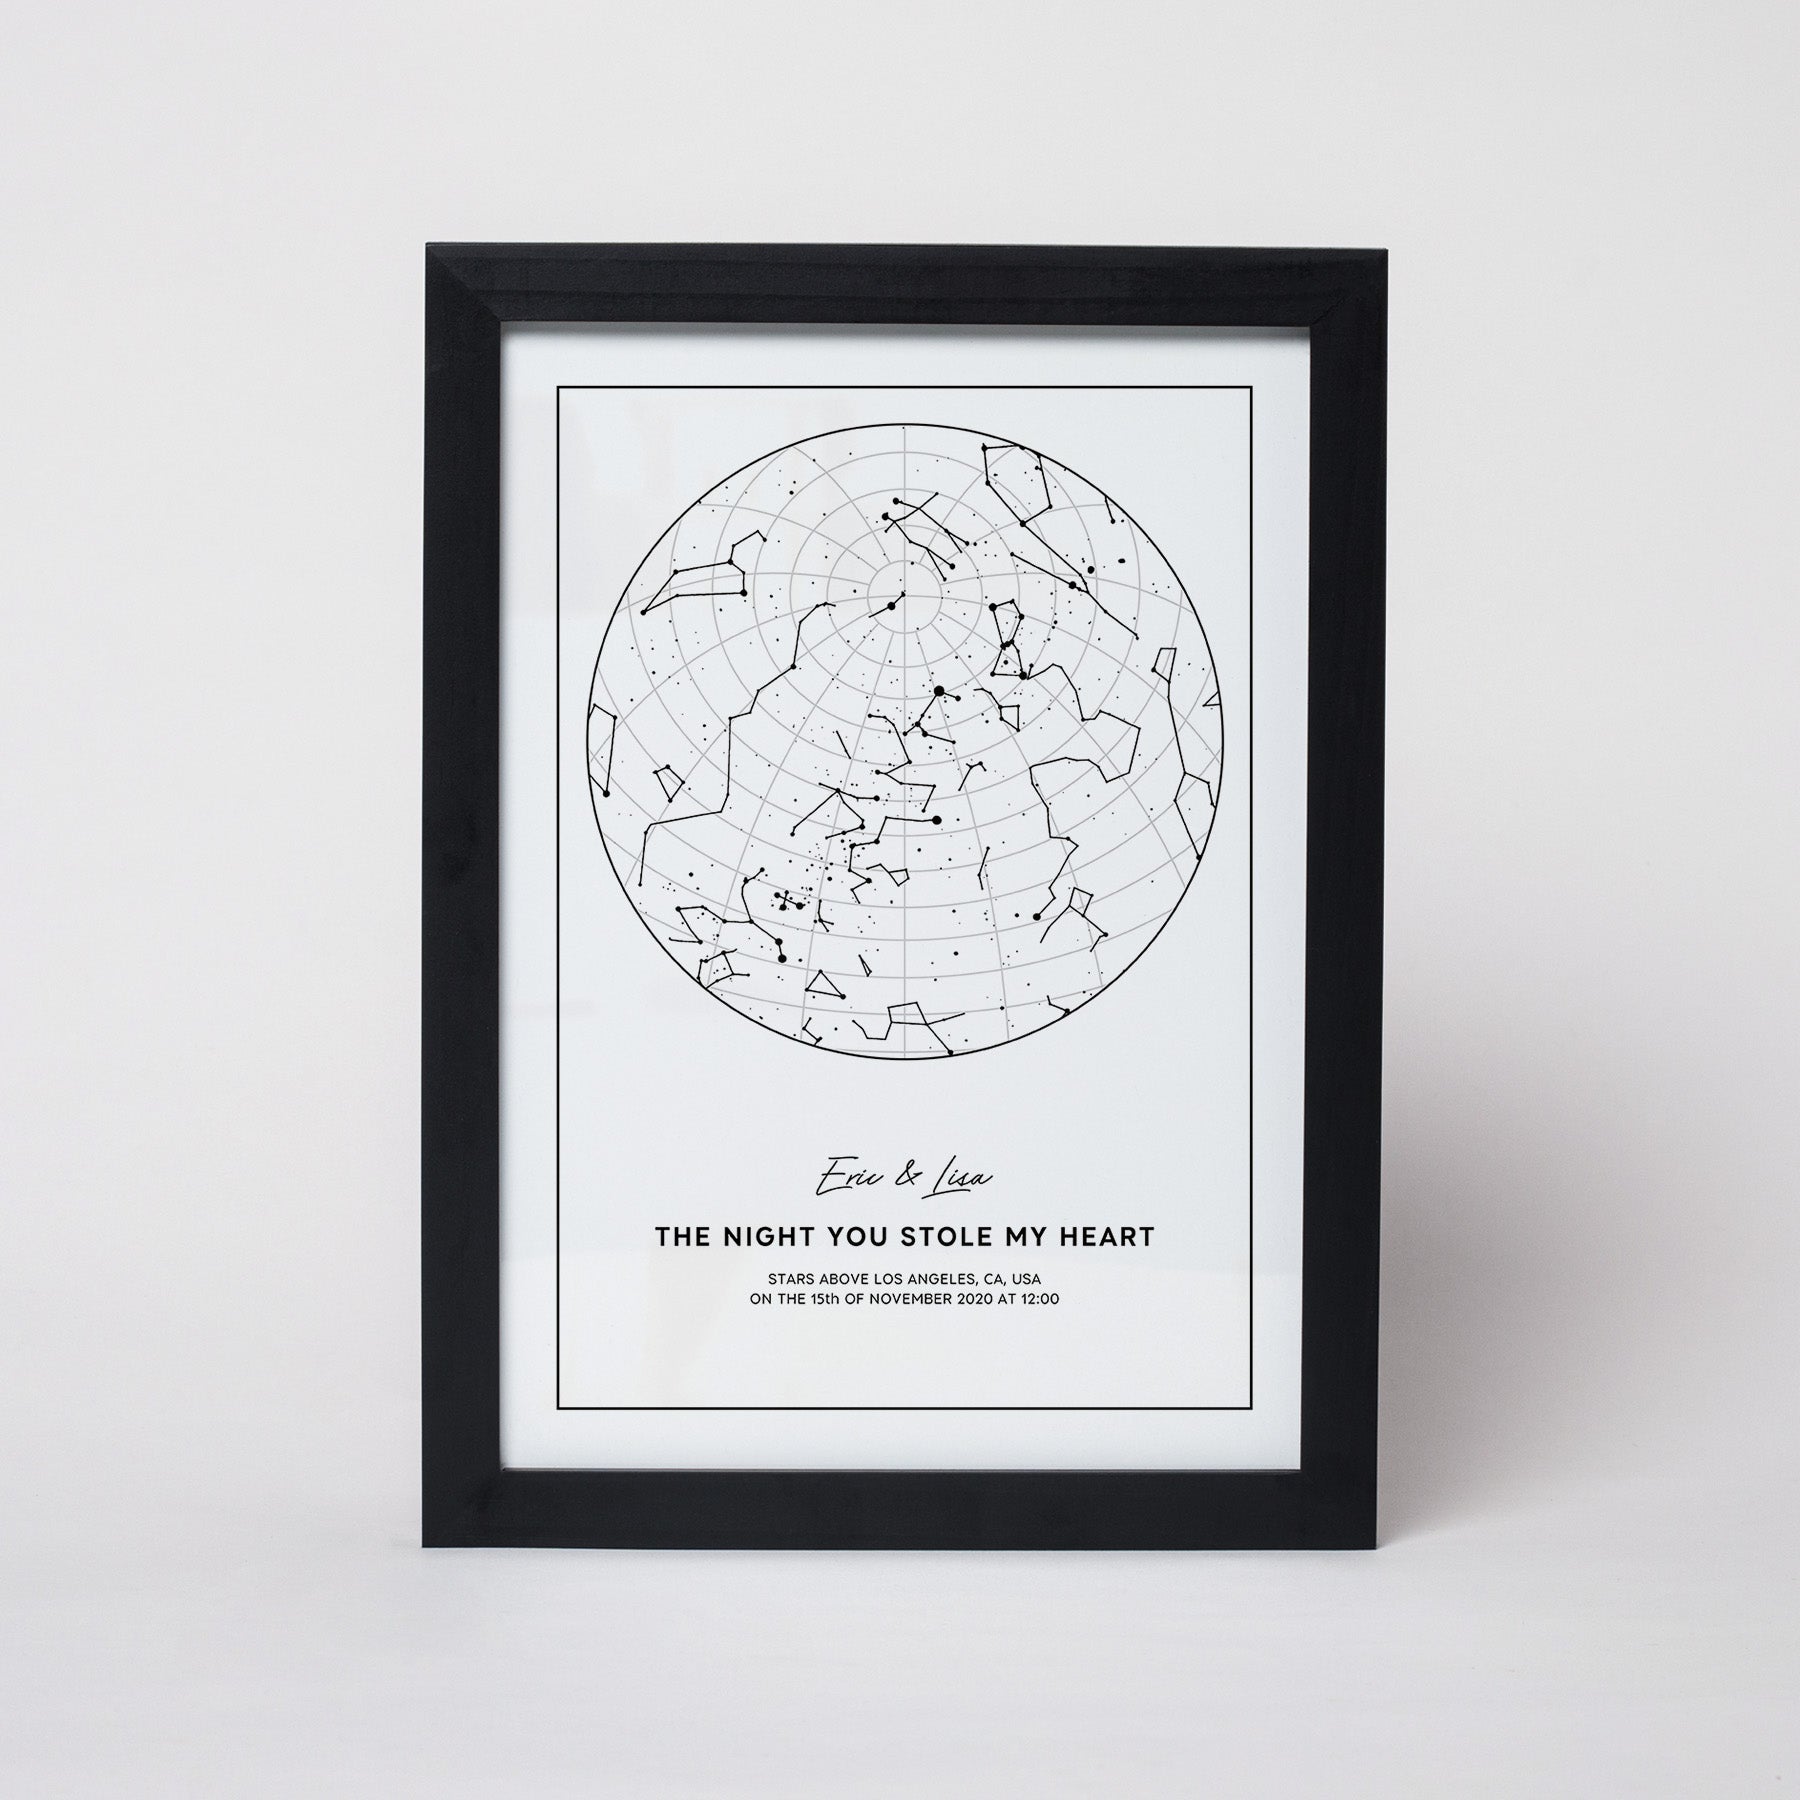 Star map of the happiest moments of your life